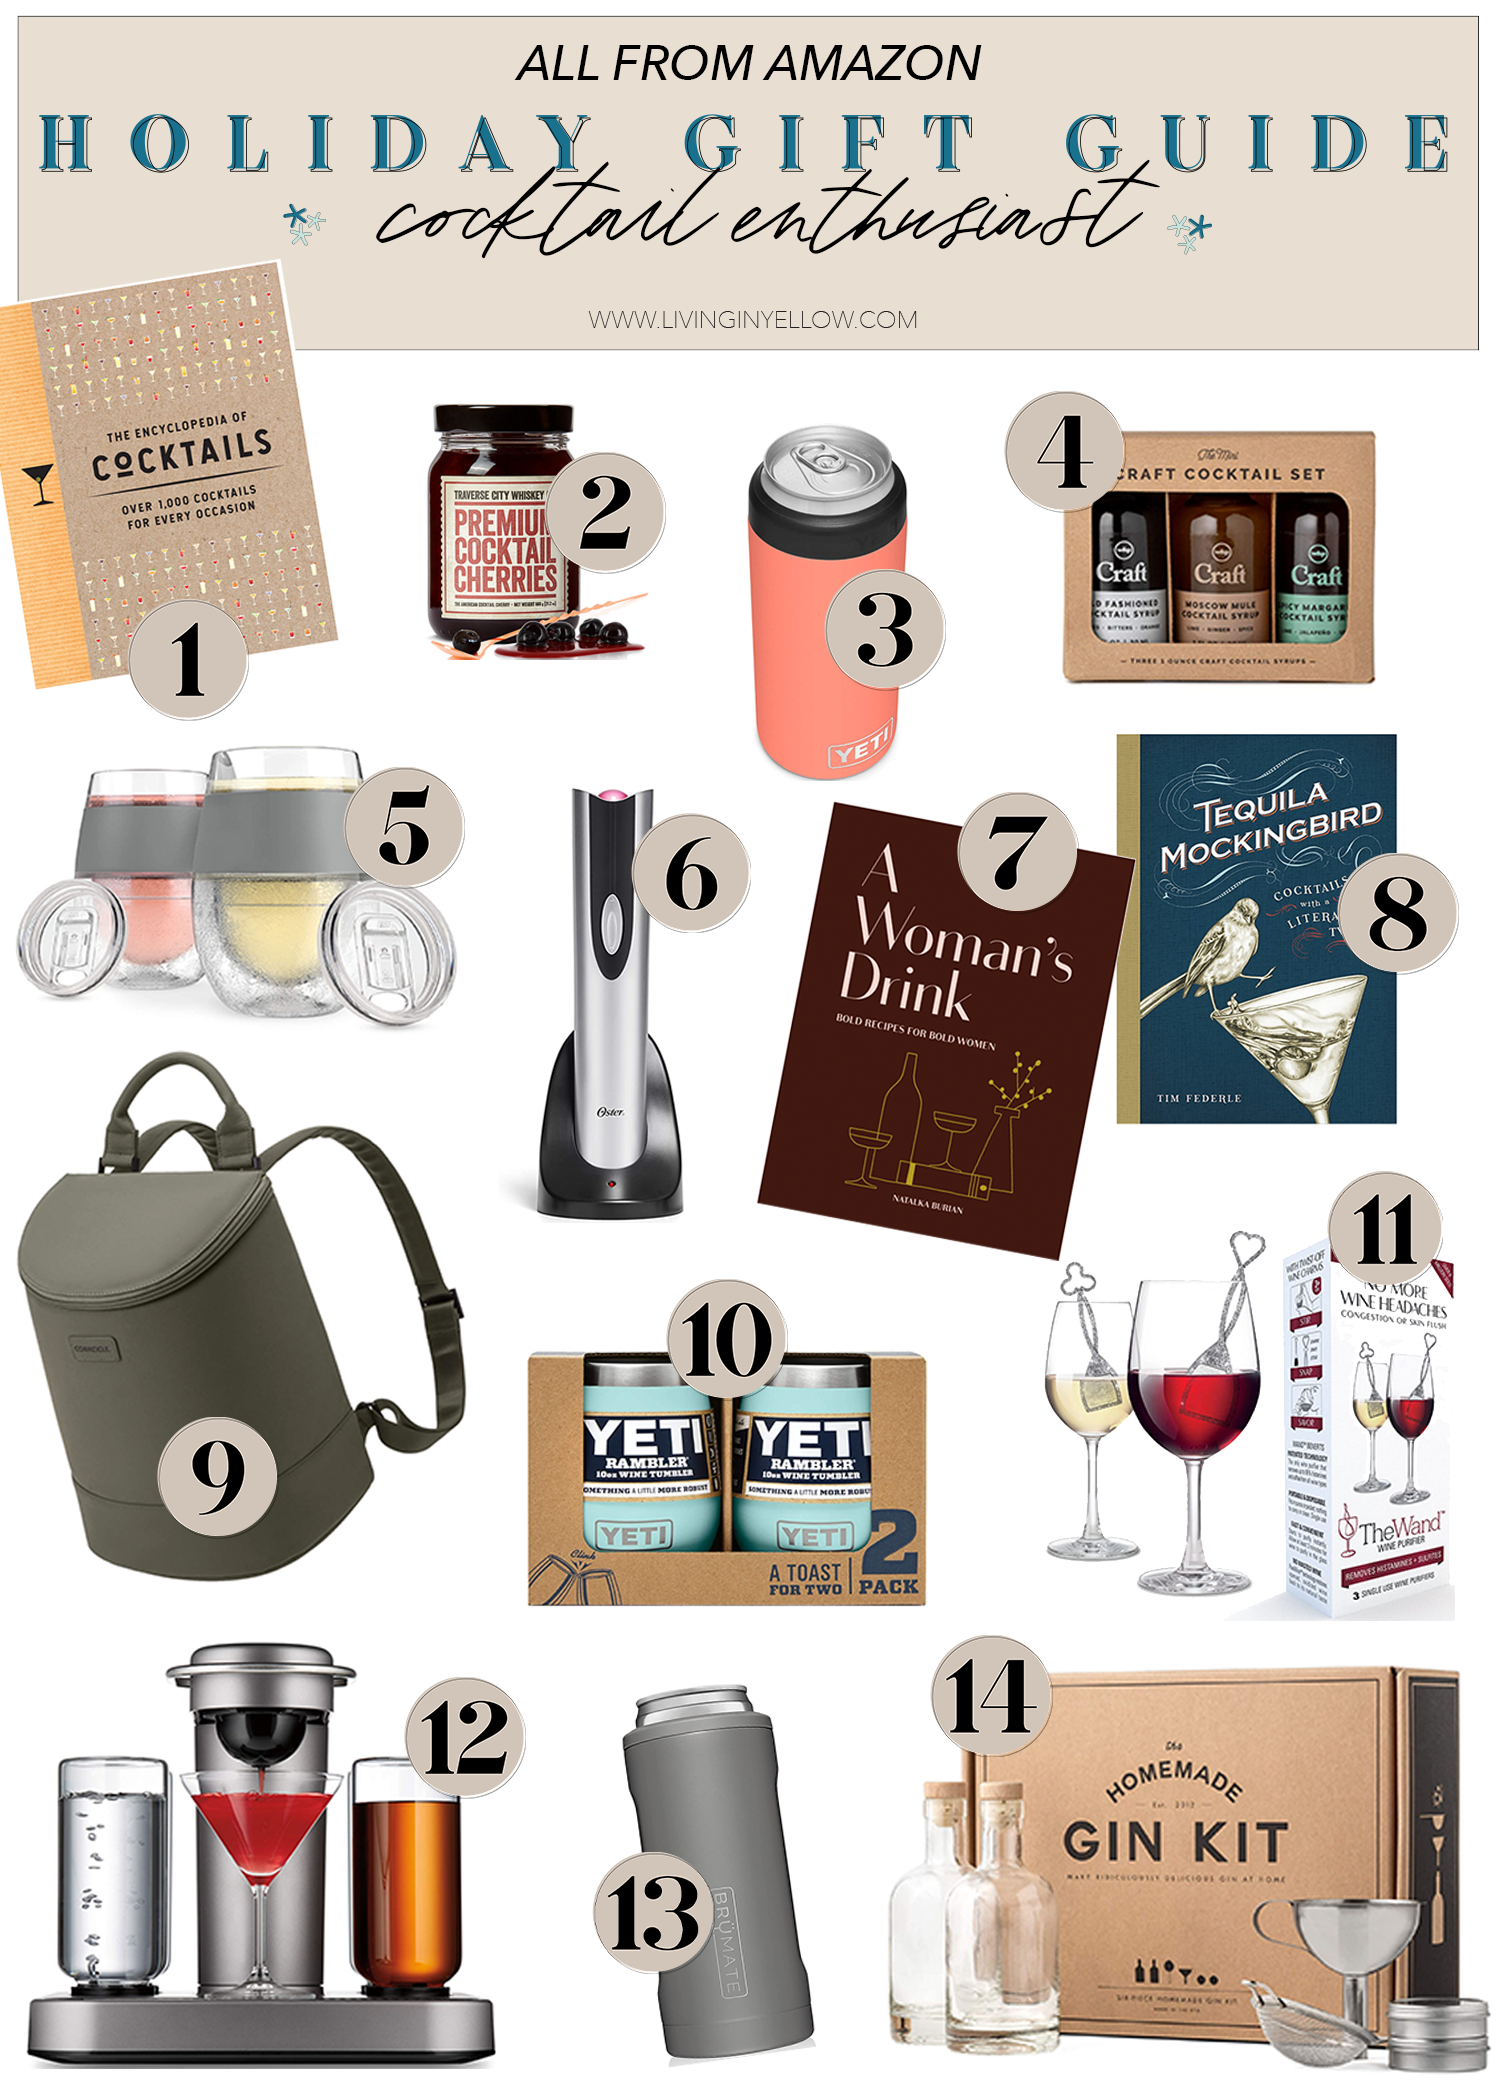 https://livinginyellow.com/wp-content/uploads/2021/10/New-Amazon-Gift-Guide-Cocktails.png